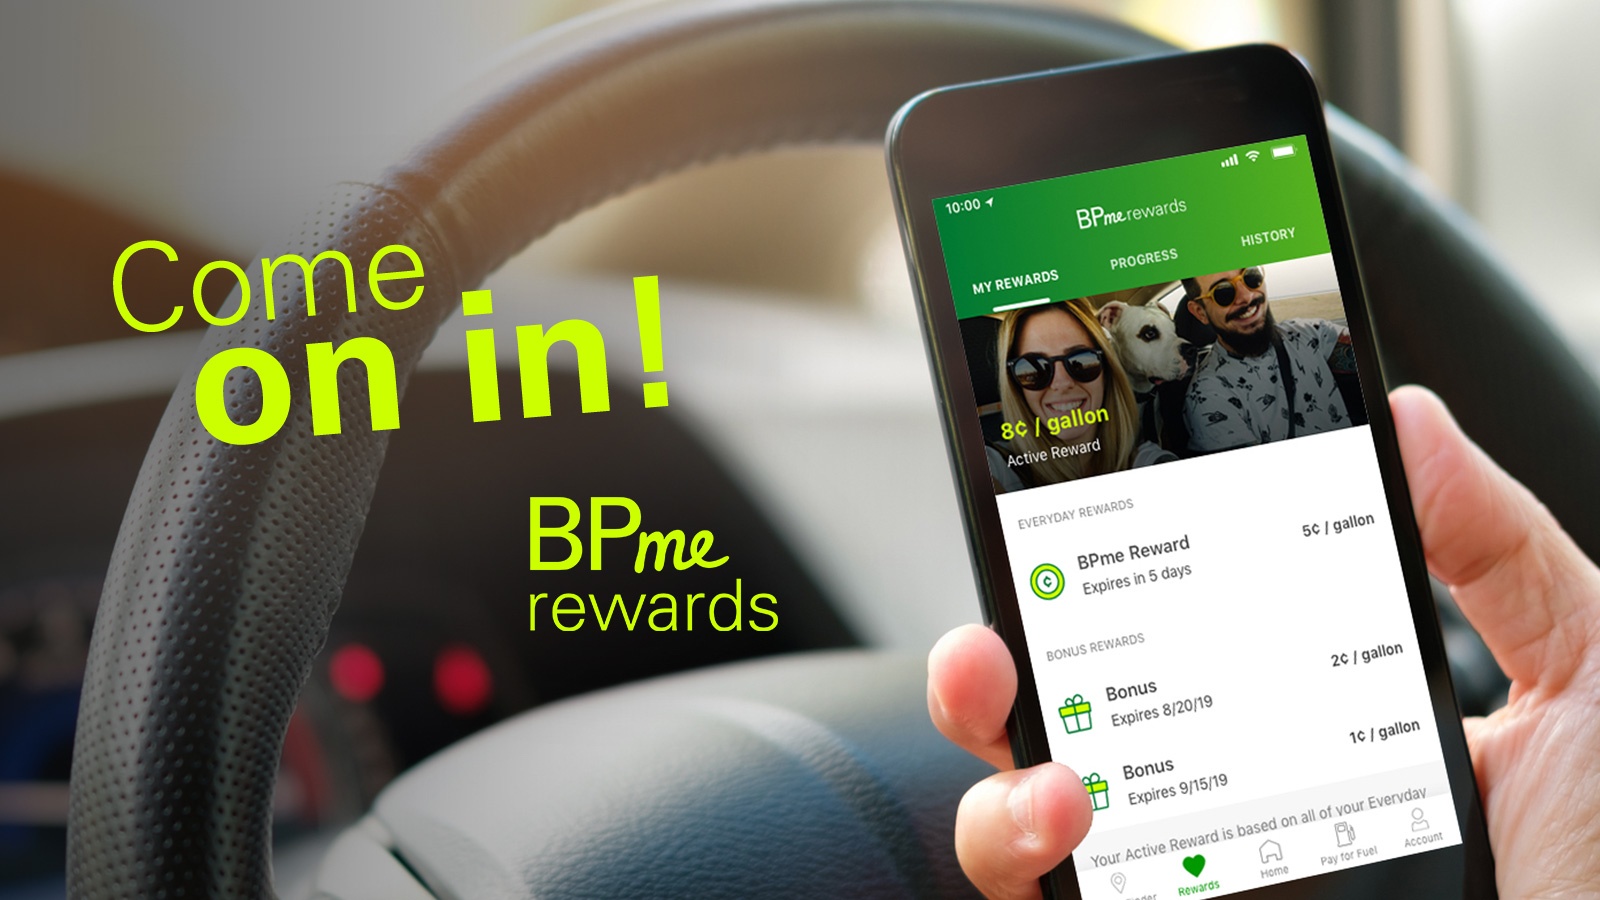 DEAL: BP - Free Small Coffee, Chai Latte or Hot Chocolate with BPme App for New Users (until 30 September 2020) 3